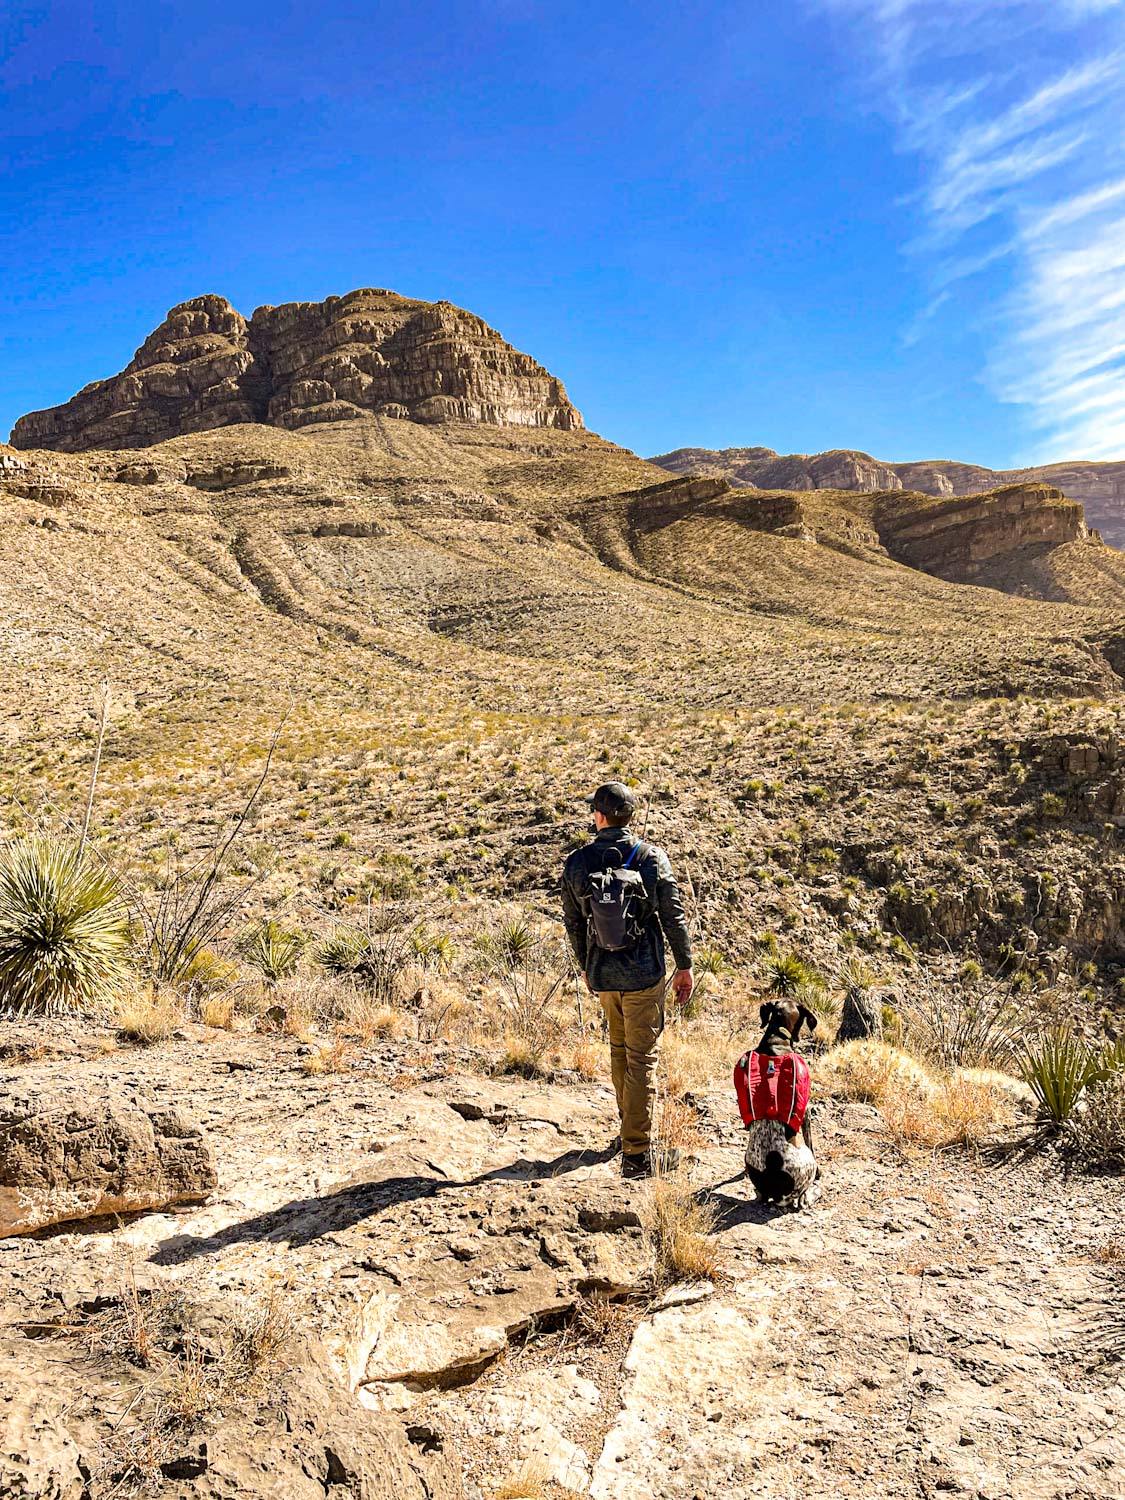 Man and his dog standing on a ledge and looking out at a desert valley surrounded by mountains